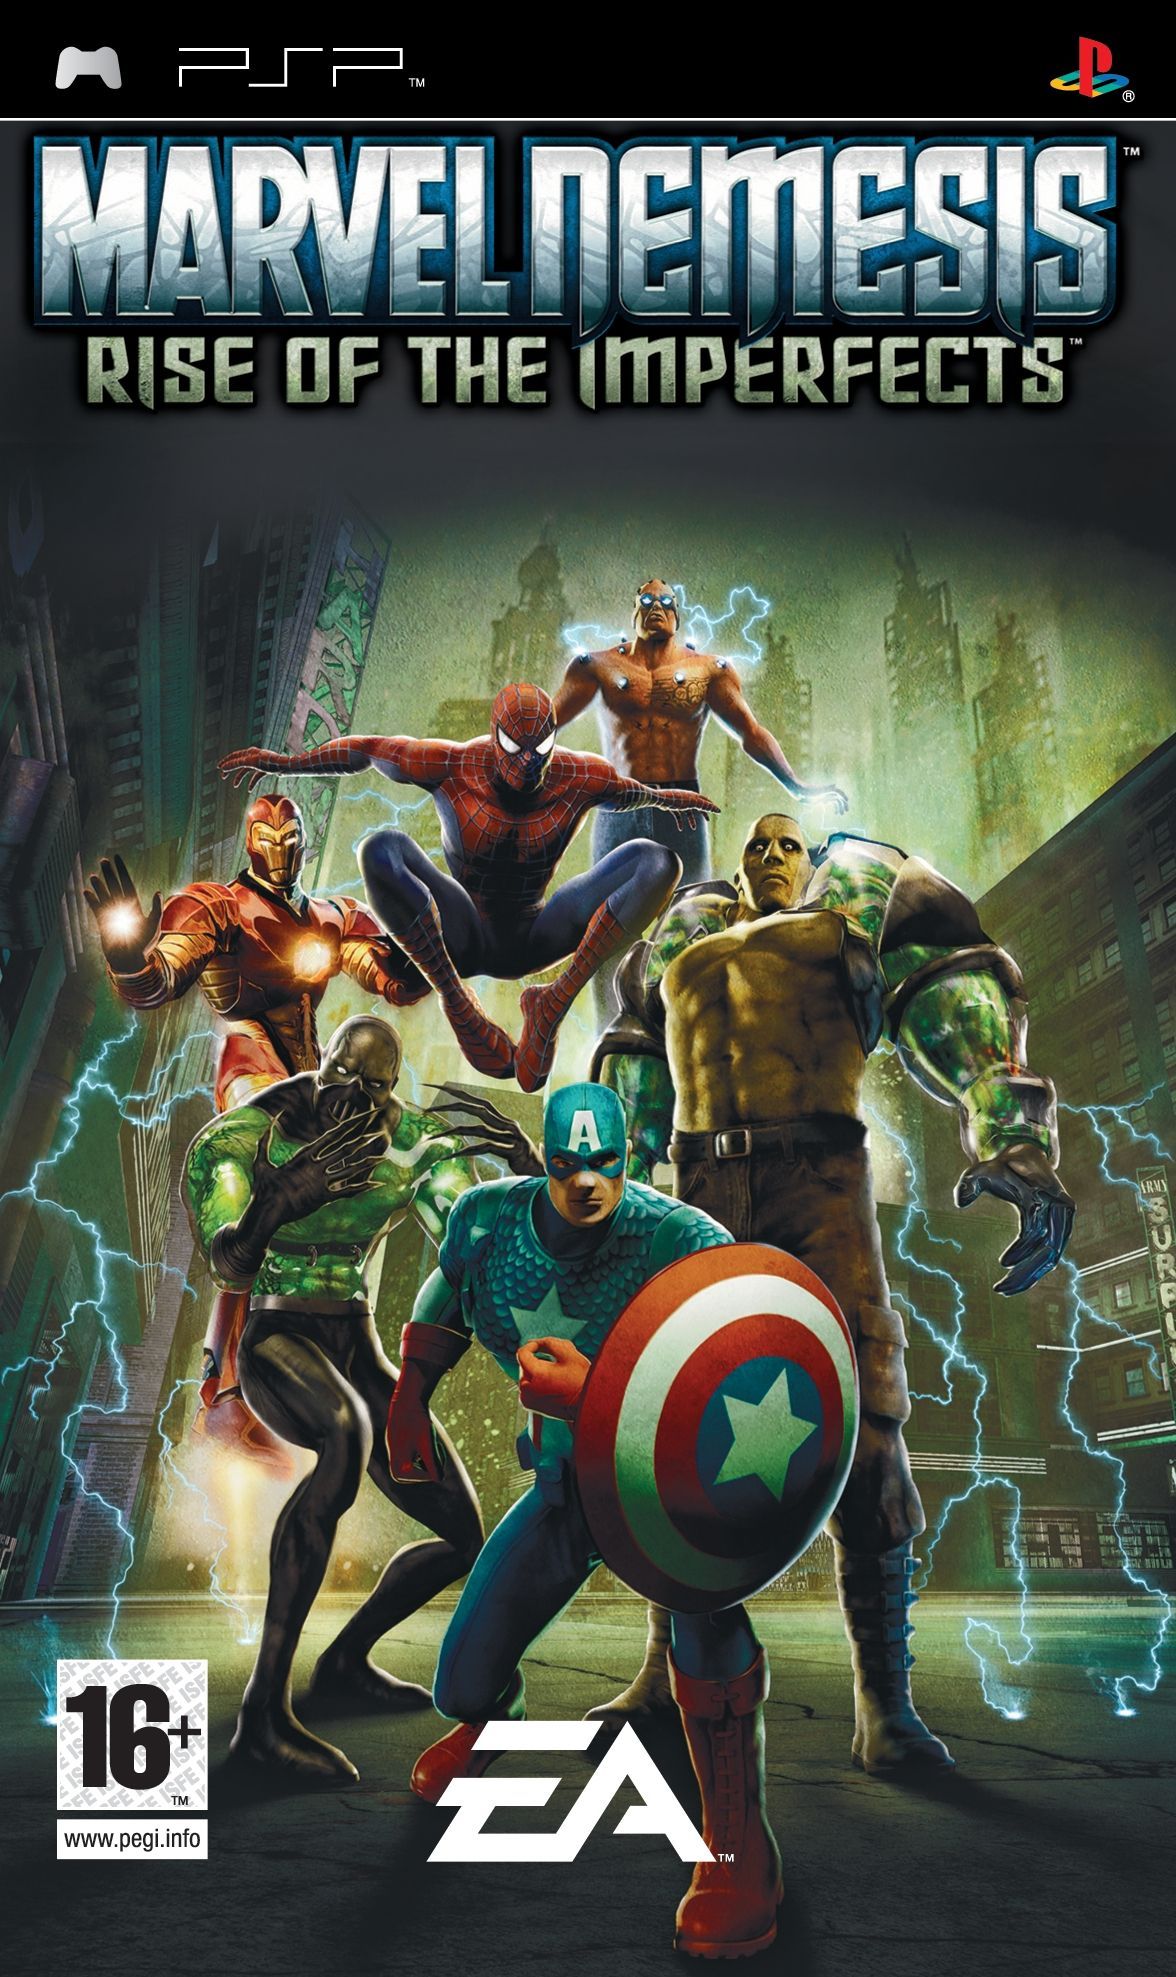 Marvel Nemesis: Rise of the Imperfects Video Game 2005